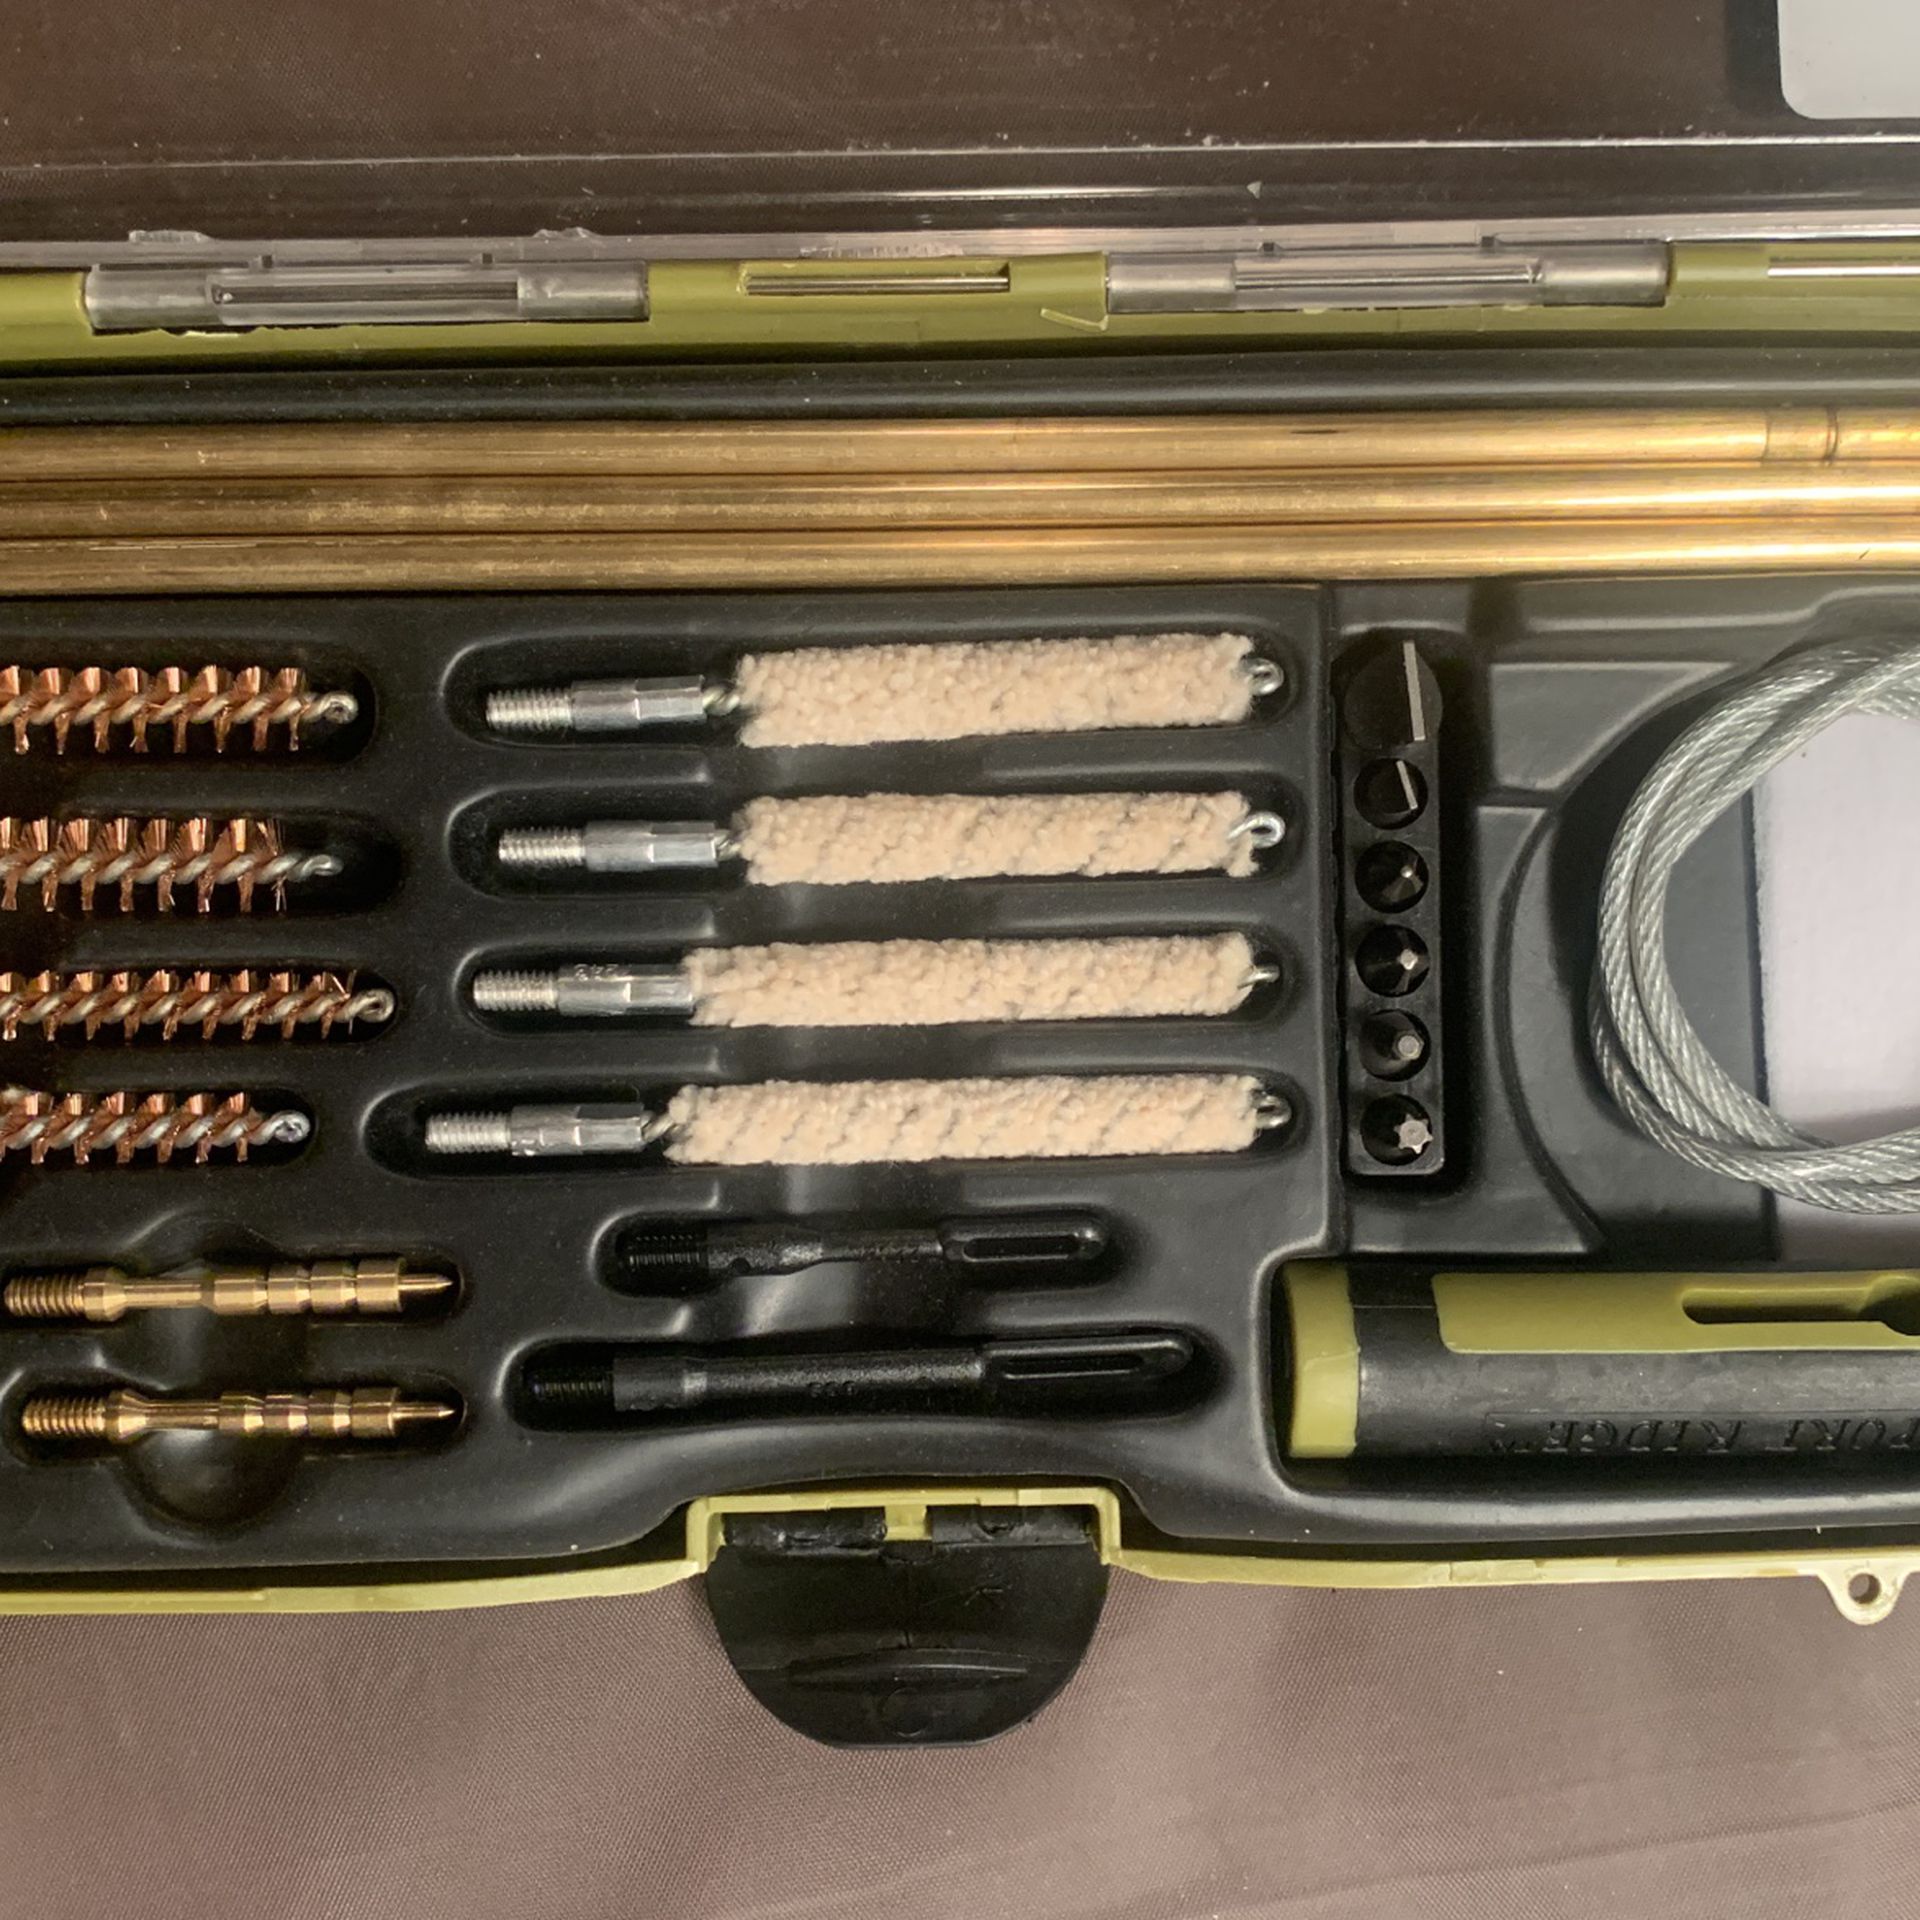 Rifle Cleaning Kit